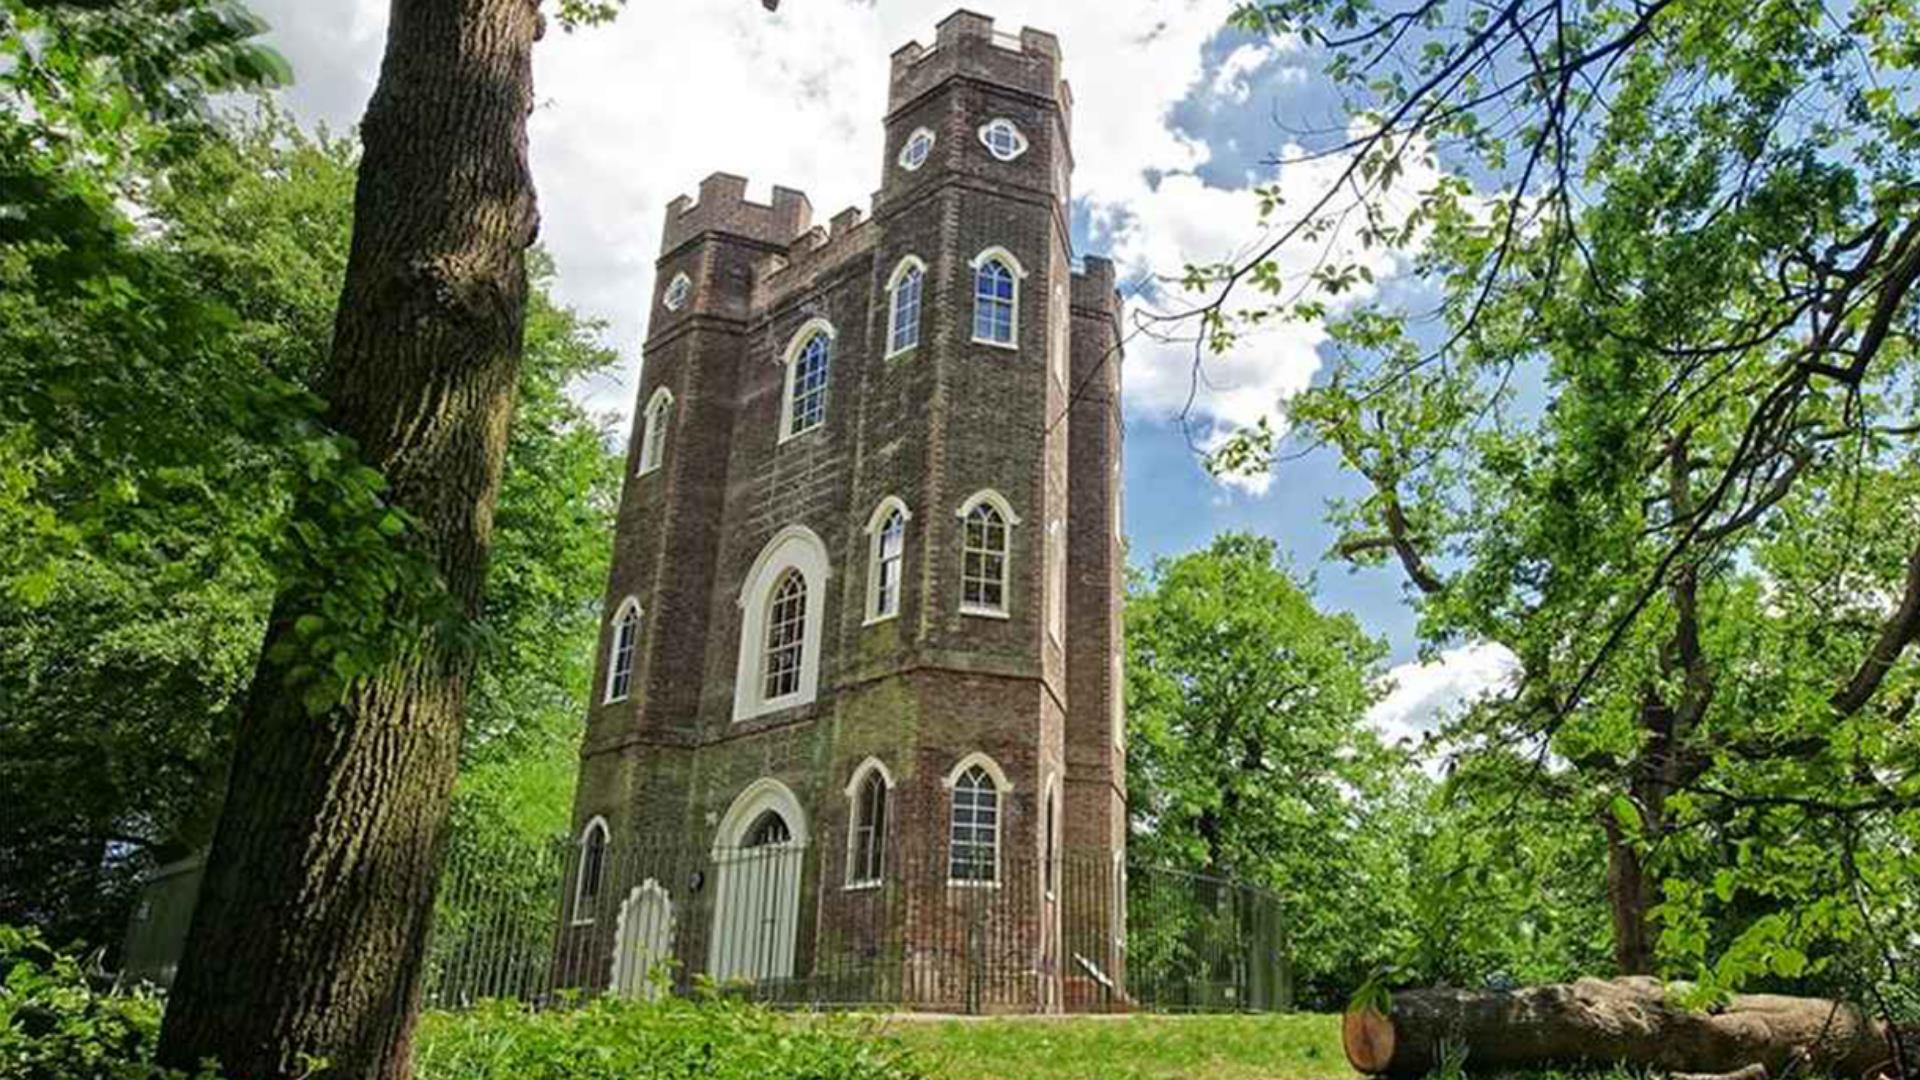 Severndroog Castle surrounded by trees.